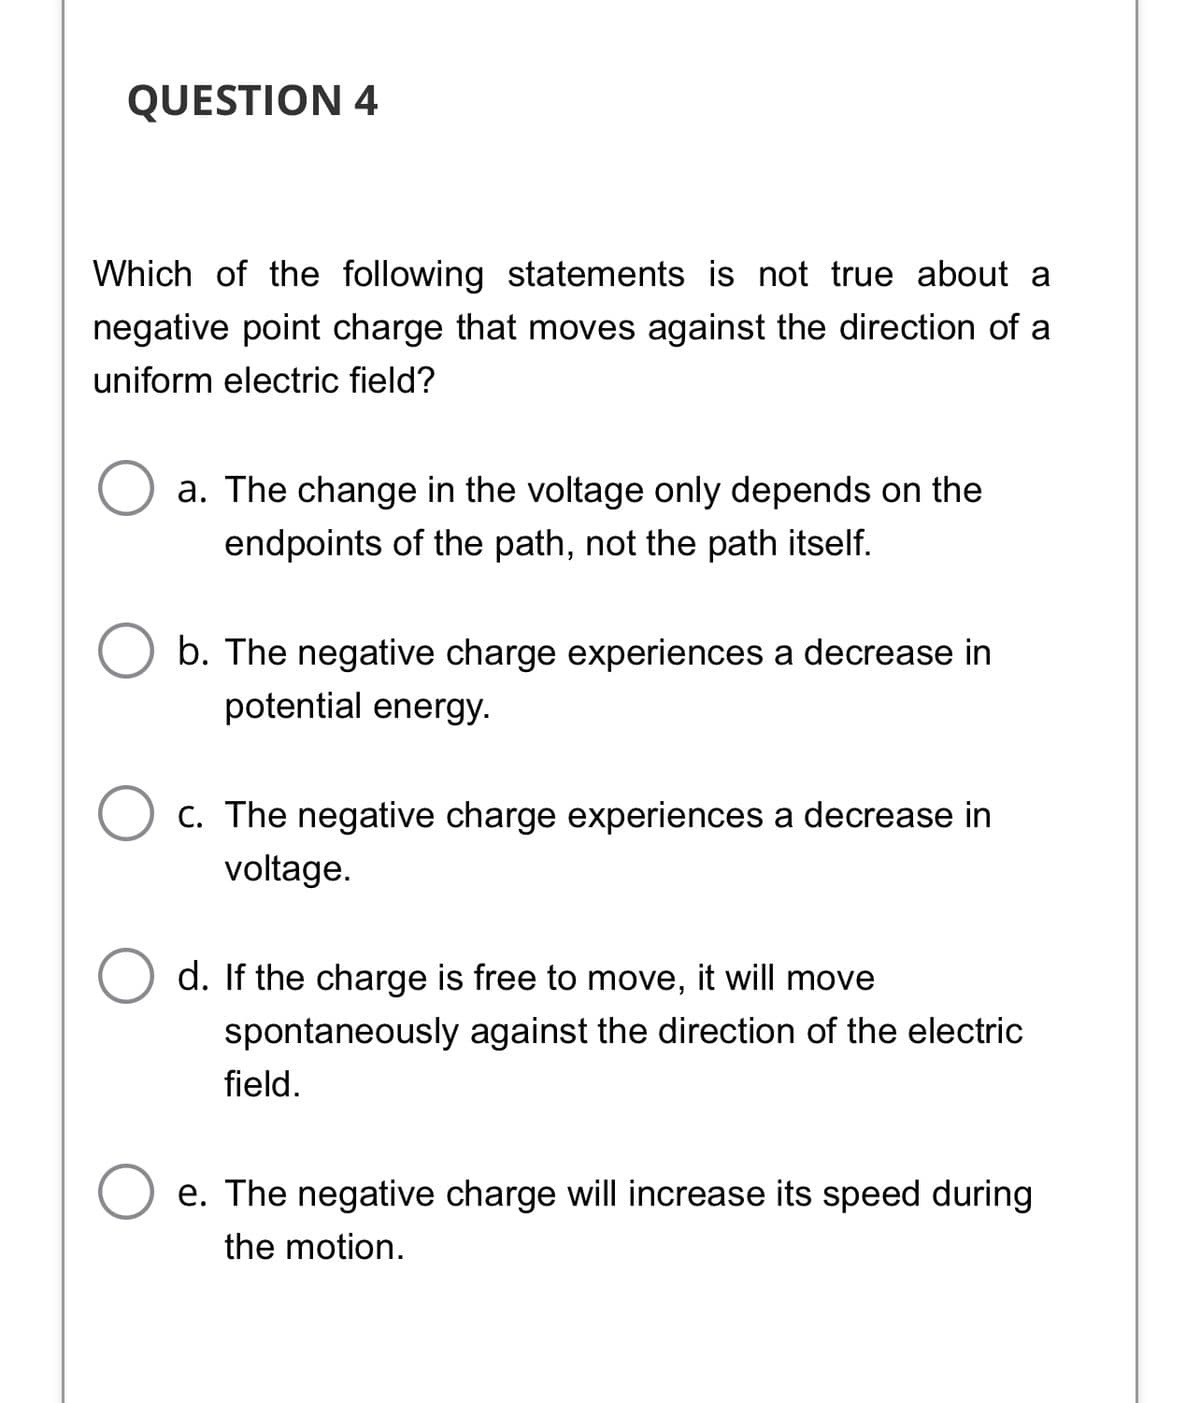 QUESTION 4
Which of the following statements is not true about a
negative point charge that moves against the direction of a
uniform electric field?
a. The change in the voltage only depends on the
endpoints of the path, not the path itself.
b. The negative charge experiences a decrease in
potential energy.
C. The negative charge experiences a decrease in
voltage.
d. If the charge is free to move, it will move
spontaneously against the direction of the electric
field.
e. The negative charge will increase its speed during
the motion.
